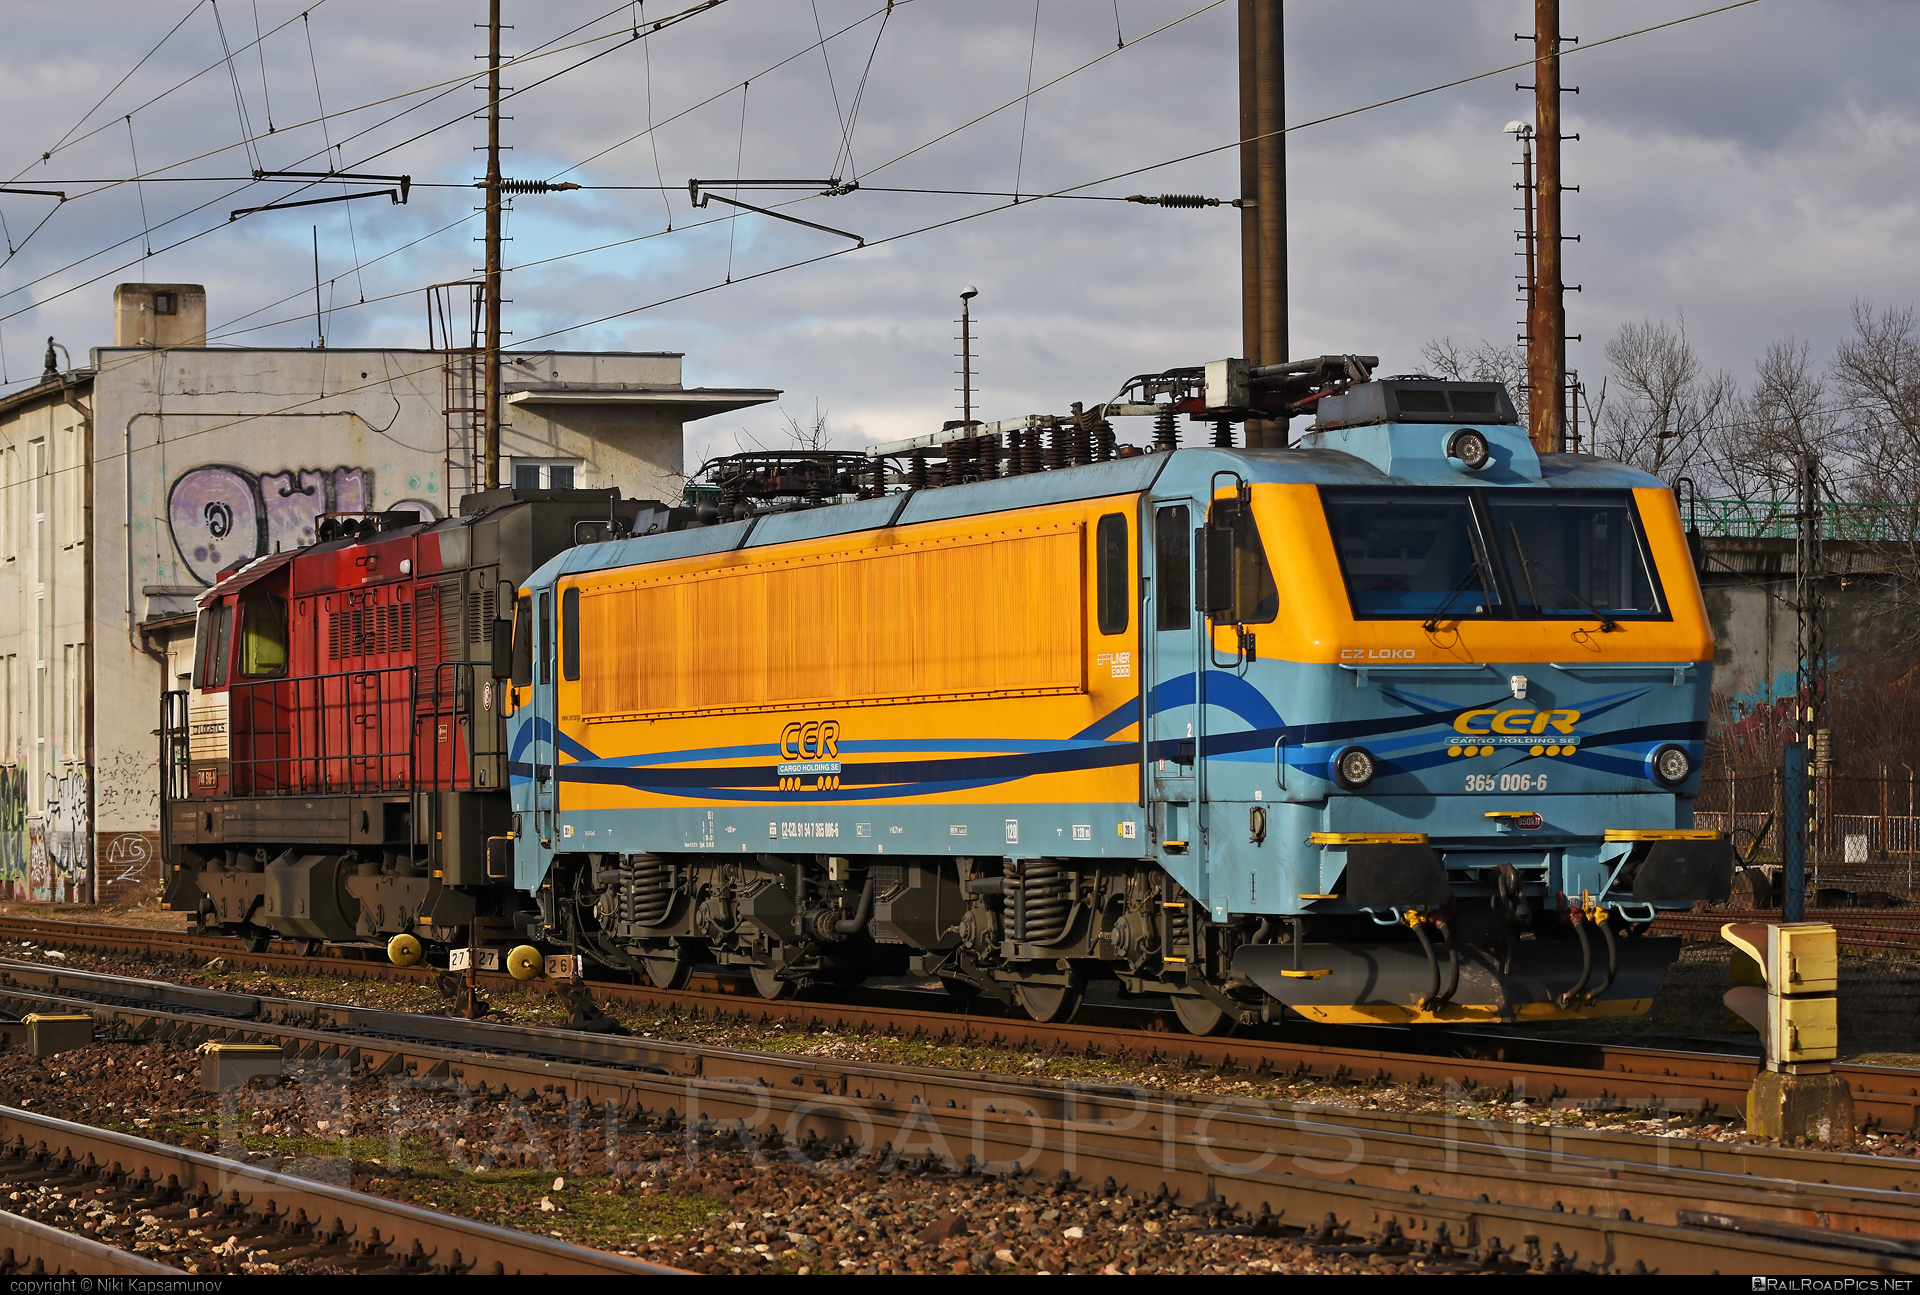 CZ LOKO EffiLiner 3000 - 365 006-6 operated by CER Slovakia a.s. #belgicanka #cer #cersk #cerslovakia #cerslovakiaas #czloko #czlokoas #effiliner #effiliner3000 #sncb12 #sncbclass12